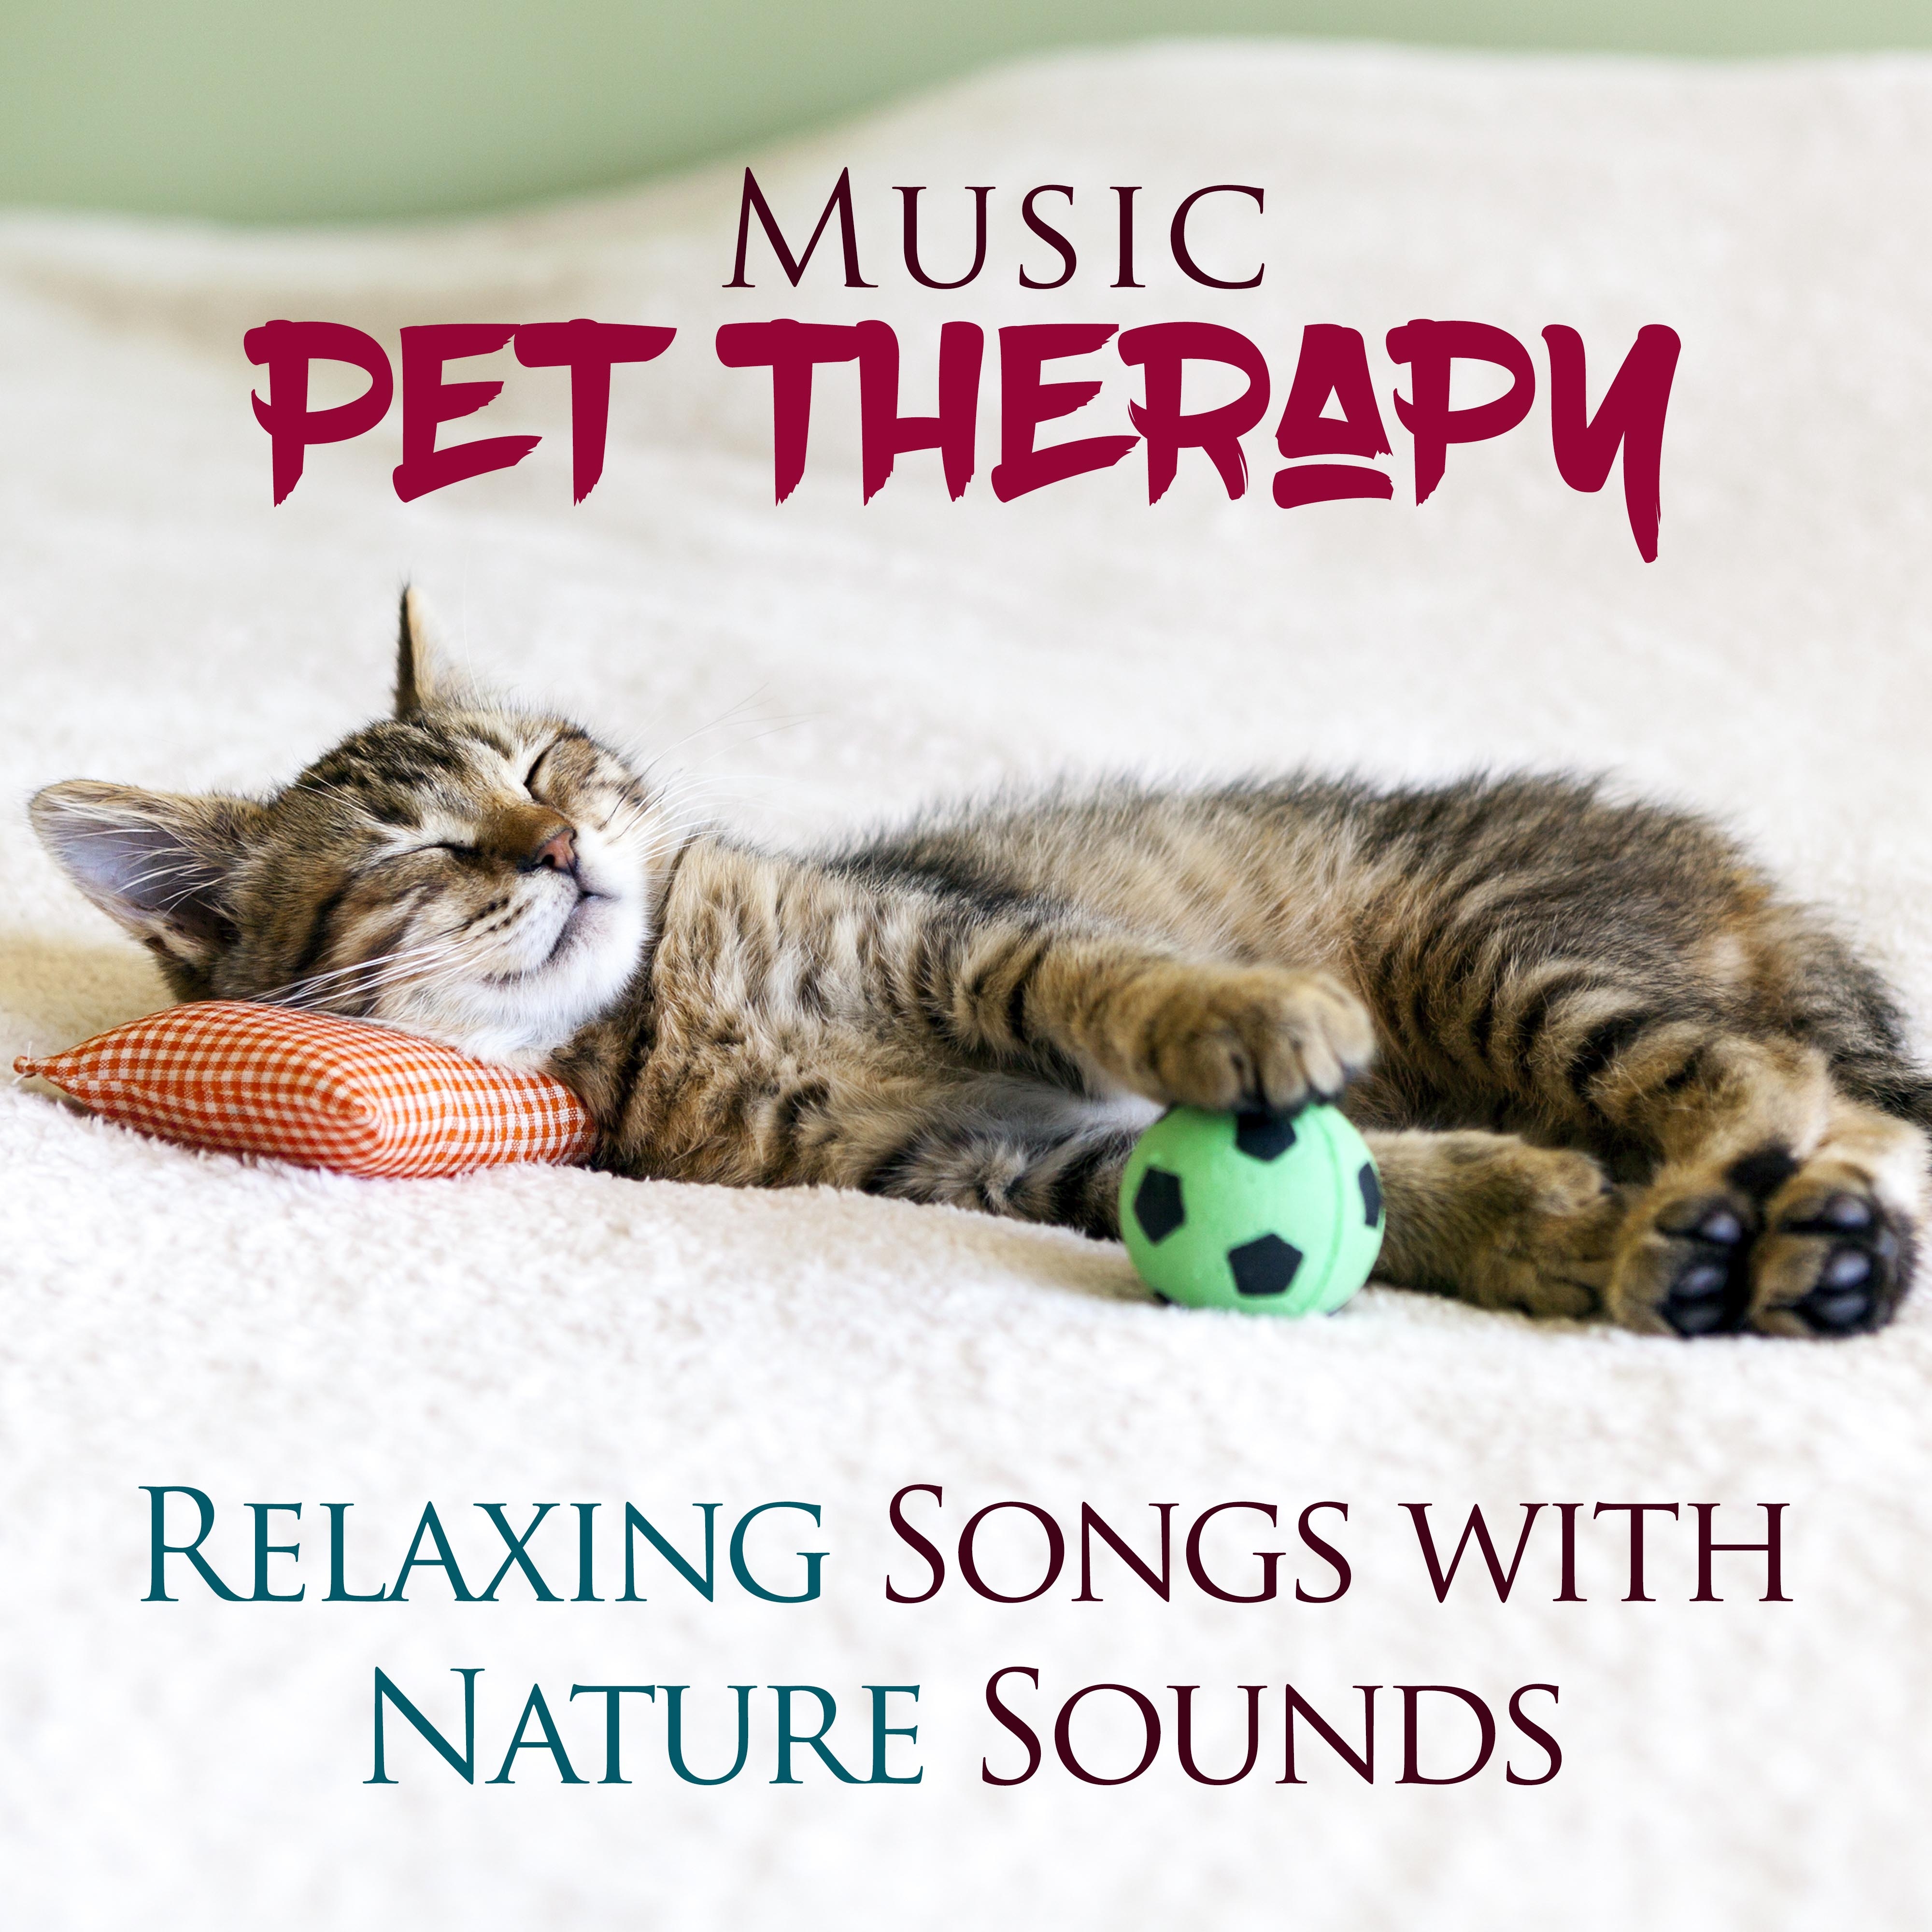 Pet Music Therapy - Relaxing Songs with Nature Sounds to Induce Sleep and Help Relax Dogs, Cats and Other Pets